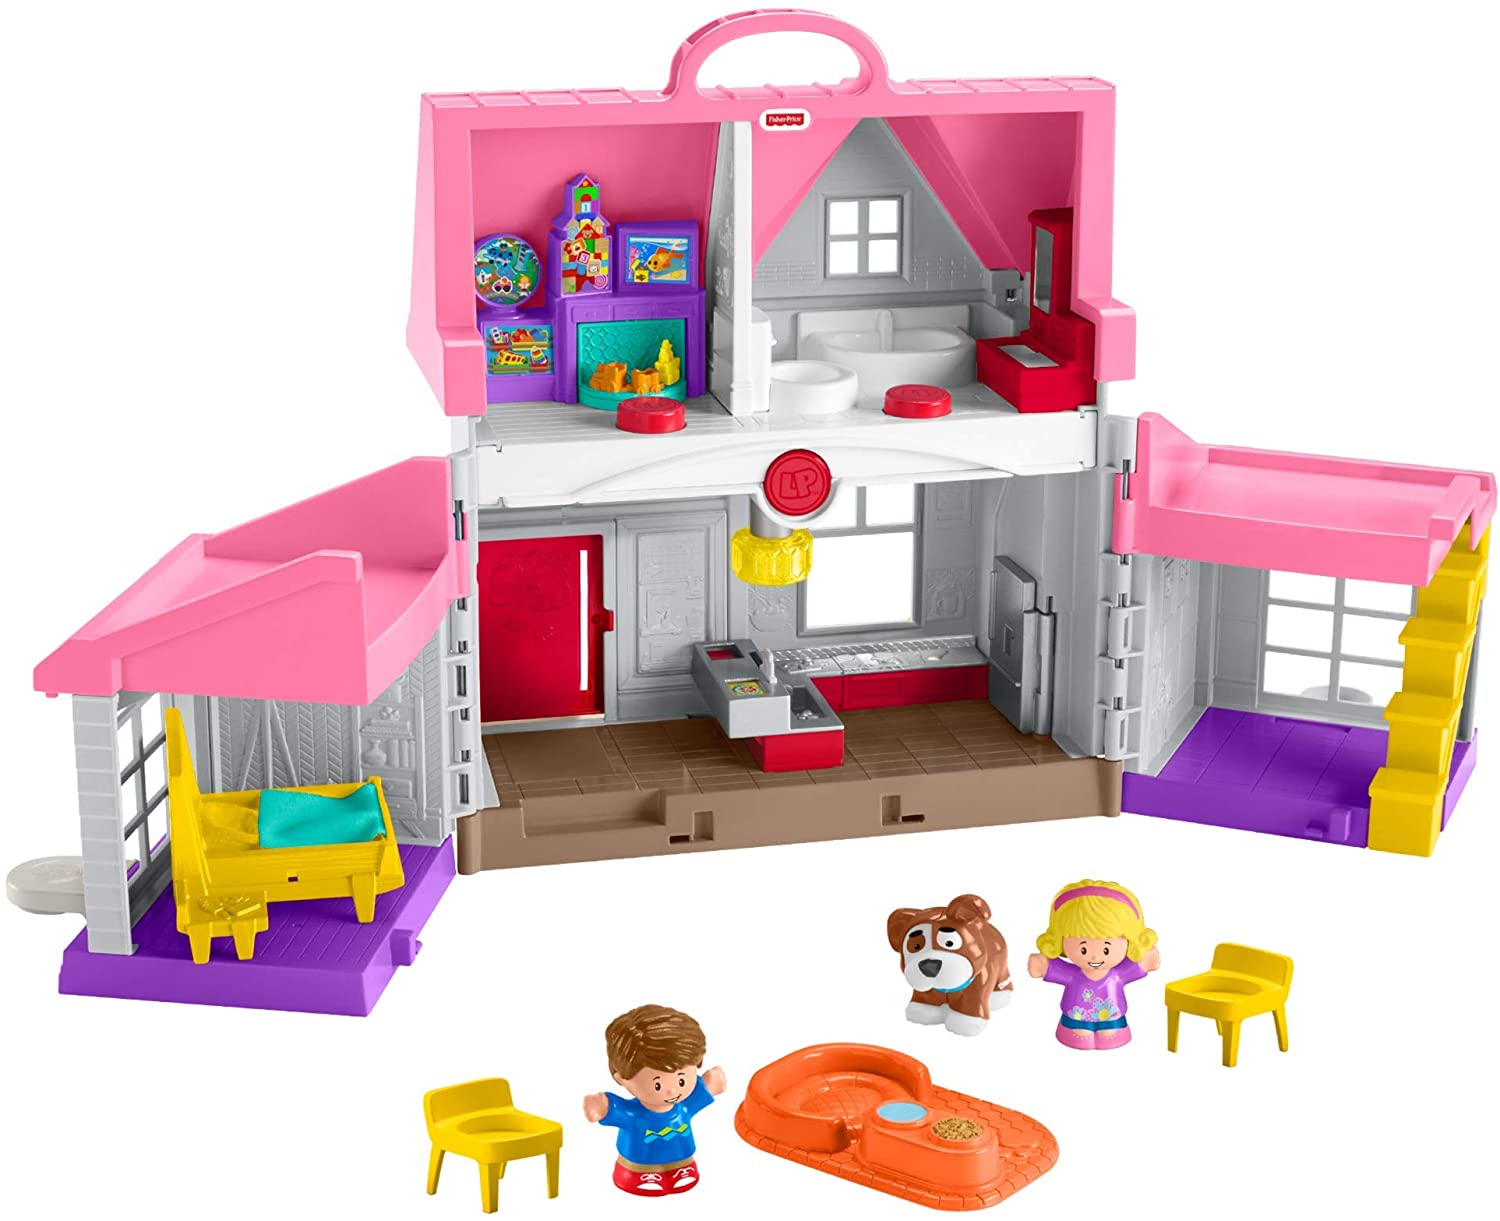 9 Best Fisher Price Dollhouse Reviews of 2023 1